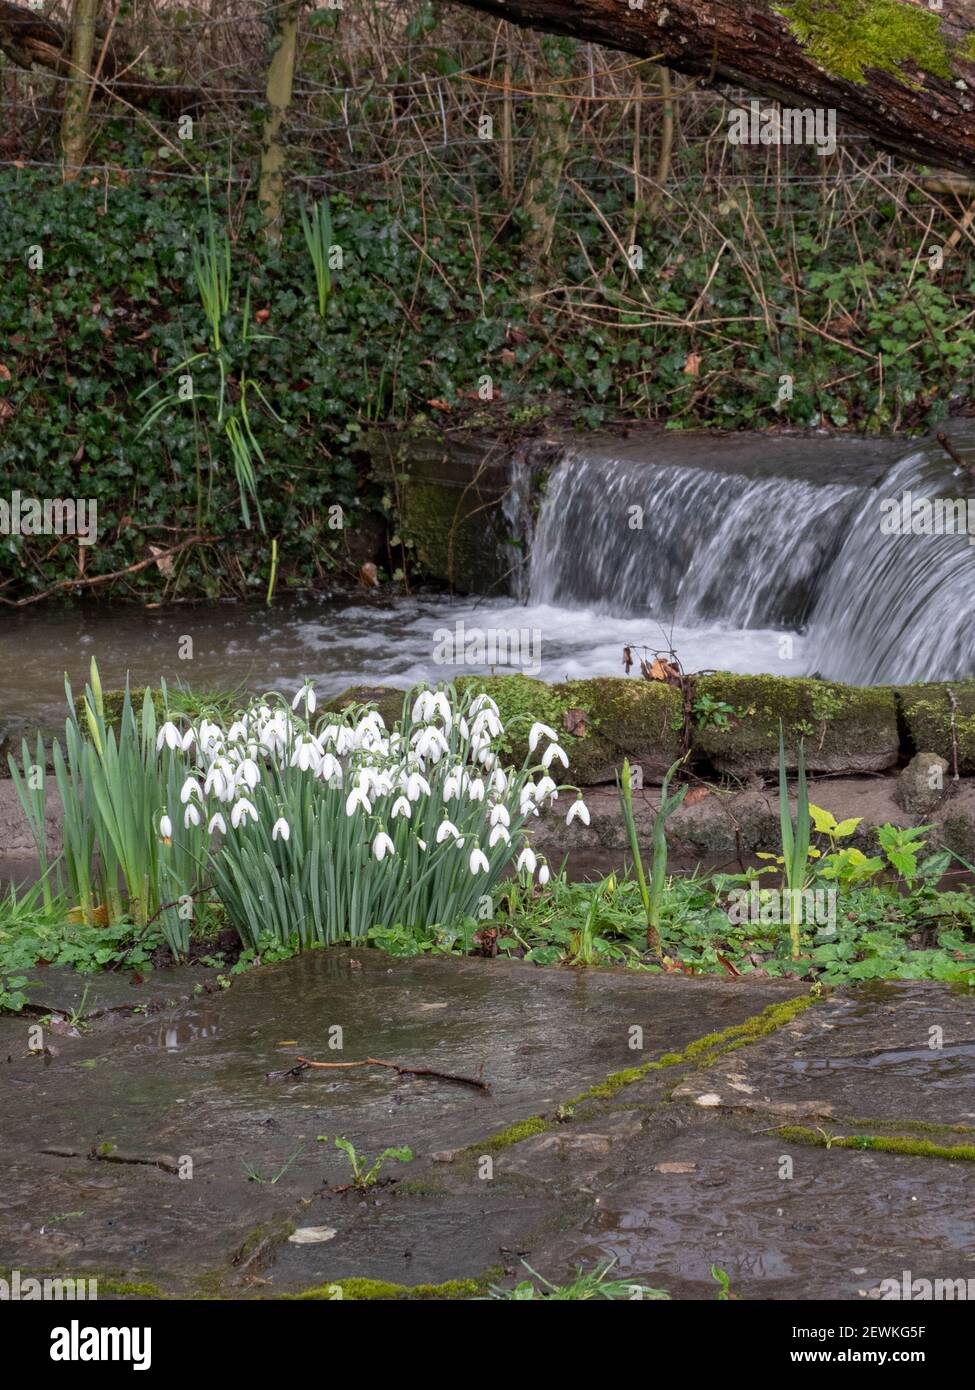 Springtime snowdrops and daffodils amongst paving slabs in front of a small cascade of water in Penleigh, Westbury, Wiltshire, England. UK. Stock Photo